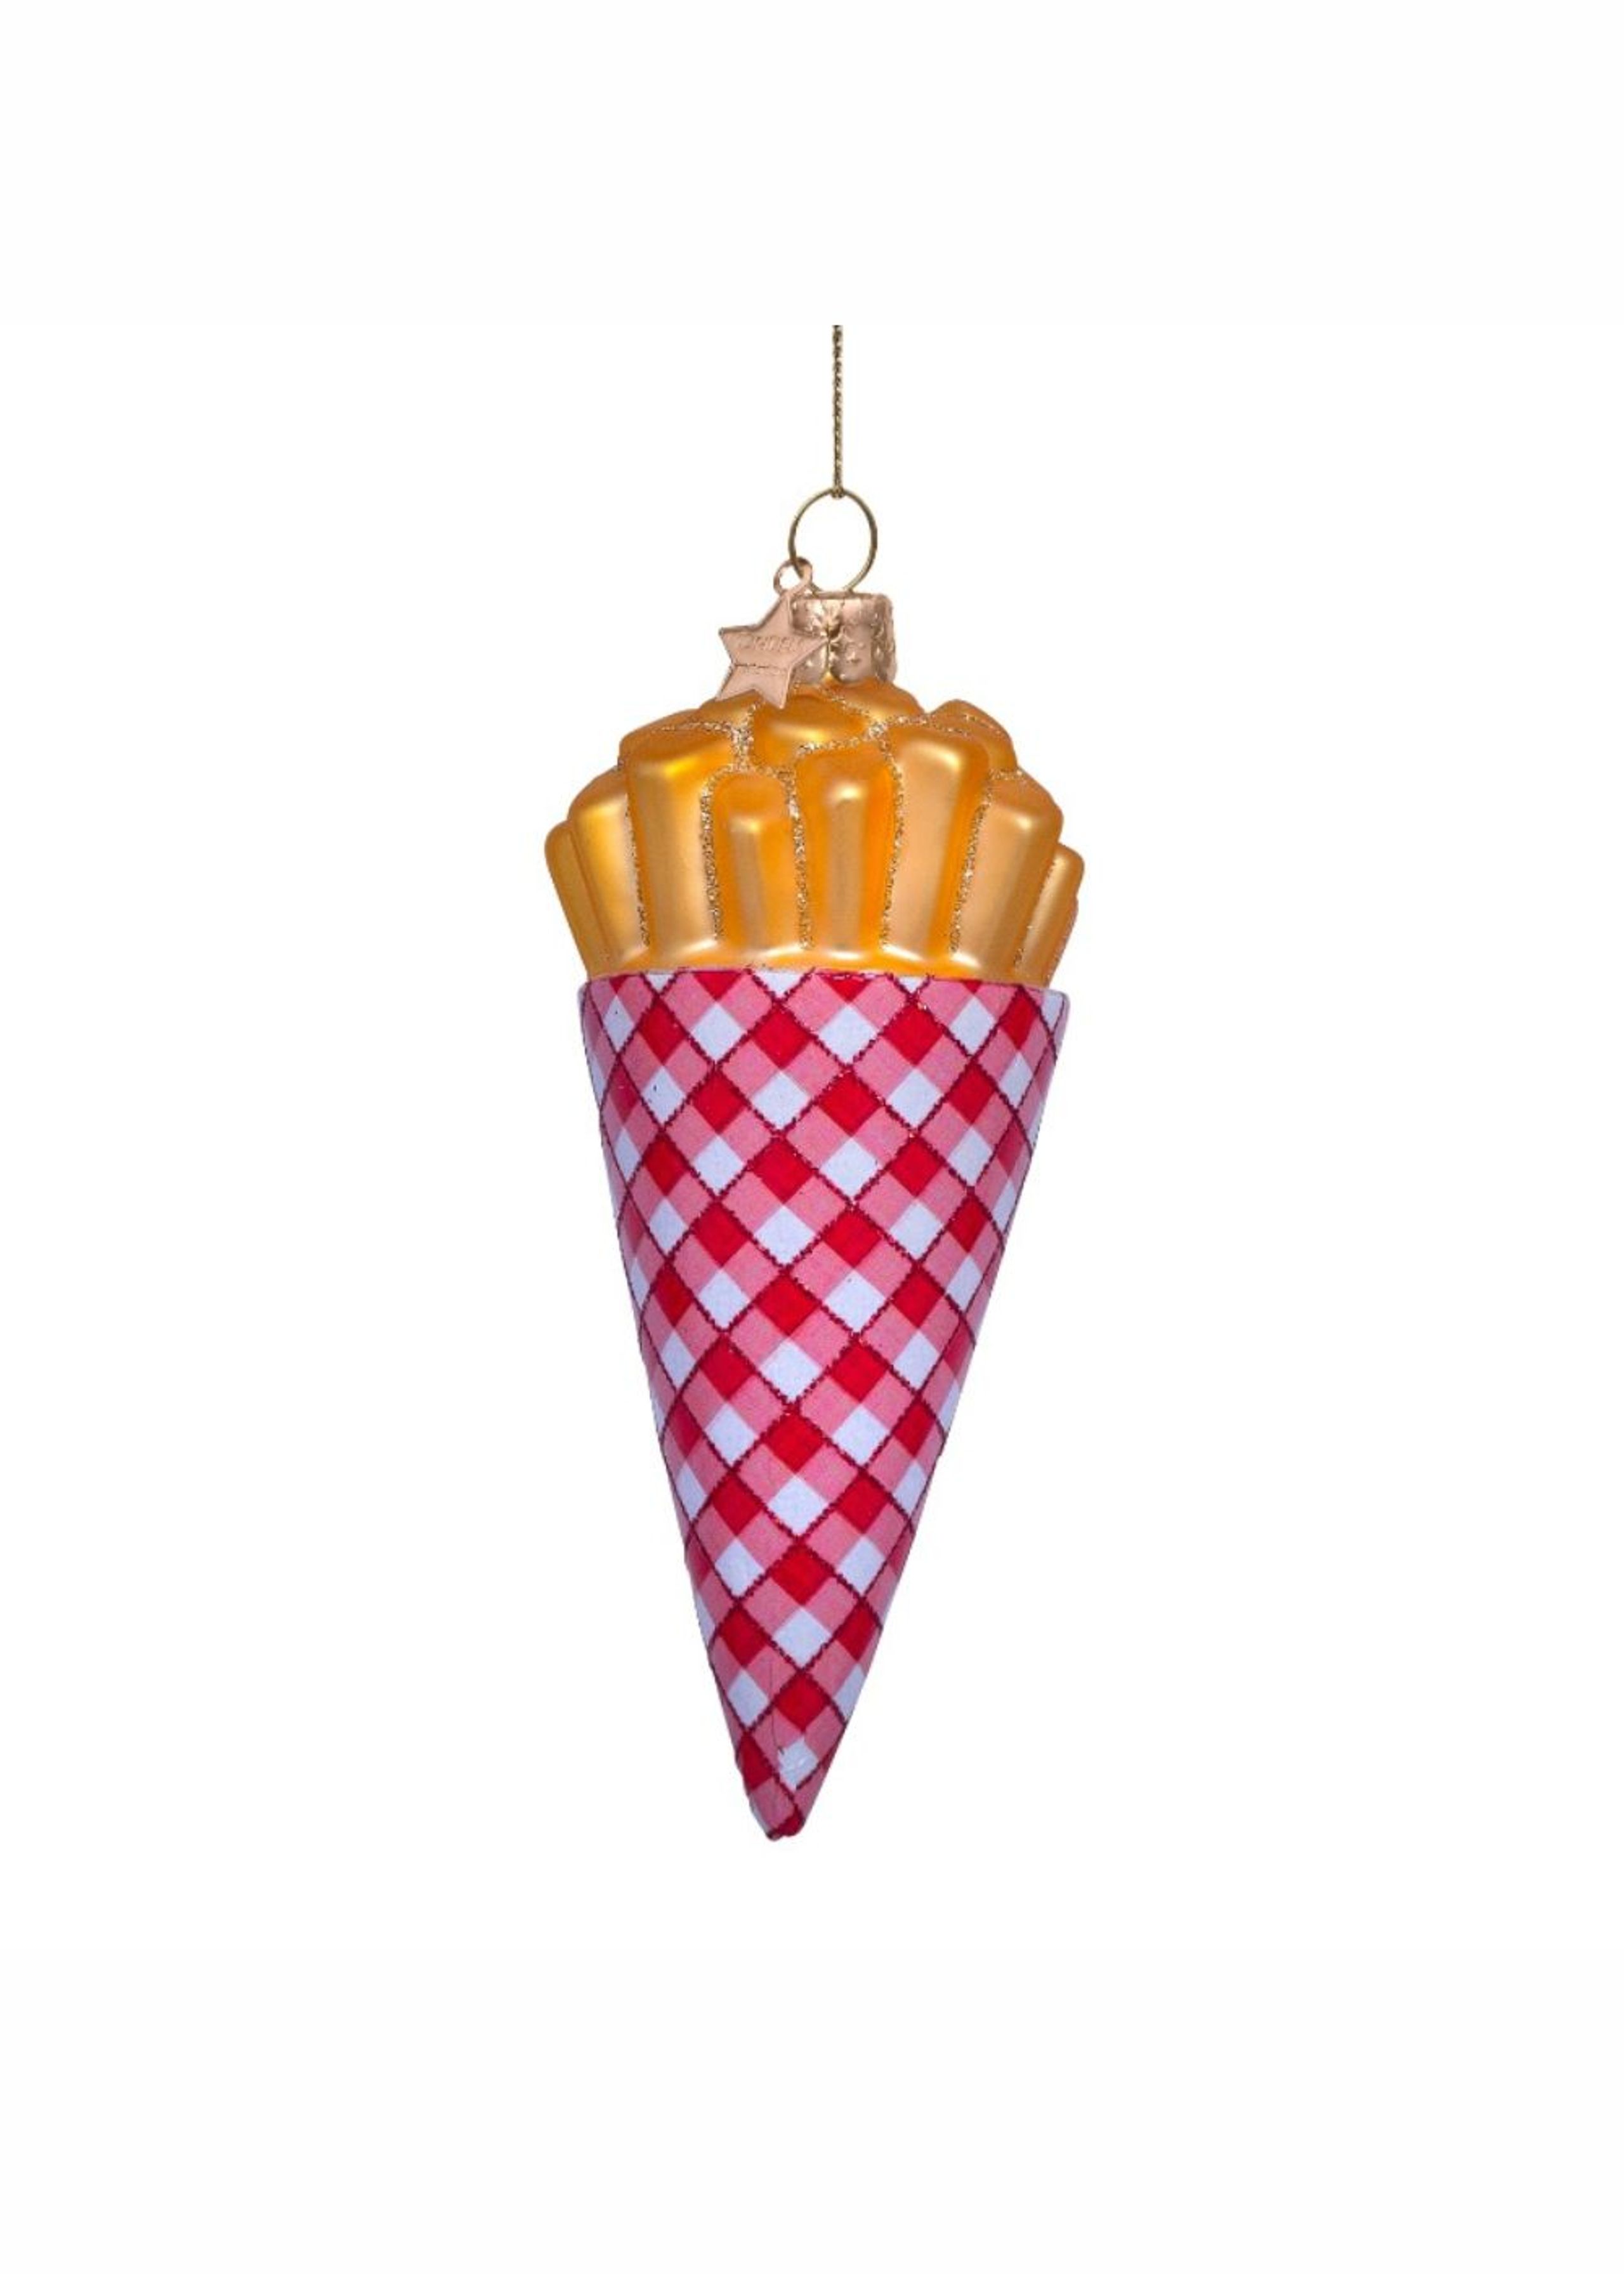 Vondels - Christbaumkugel - Ornament glass fries with mayonnaise - Red